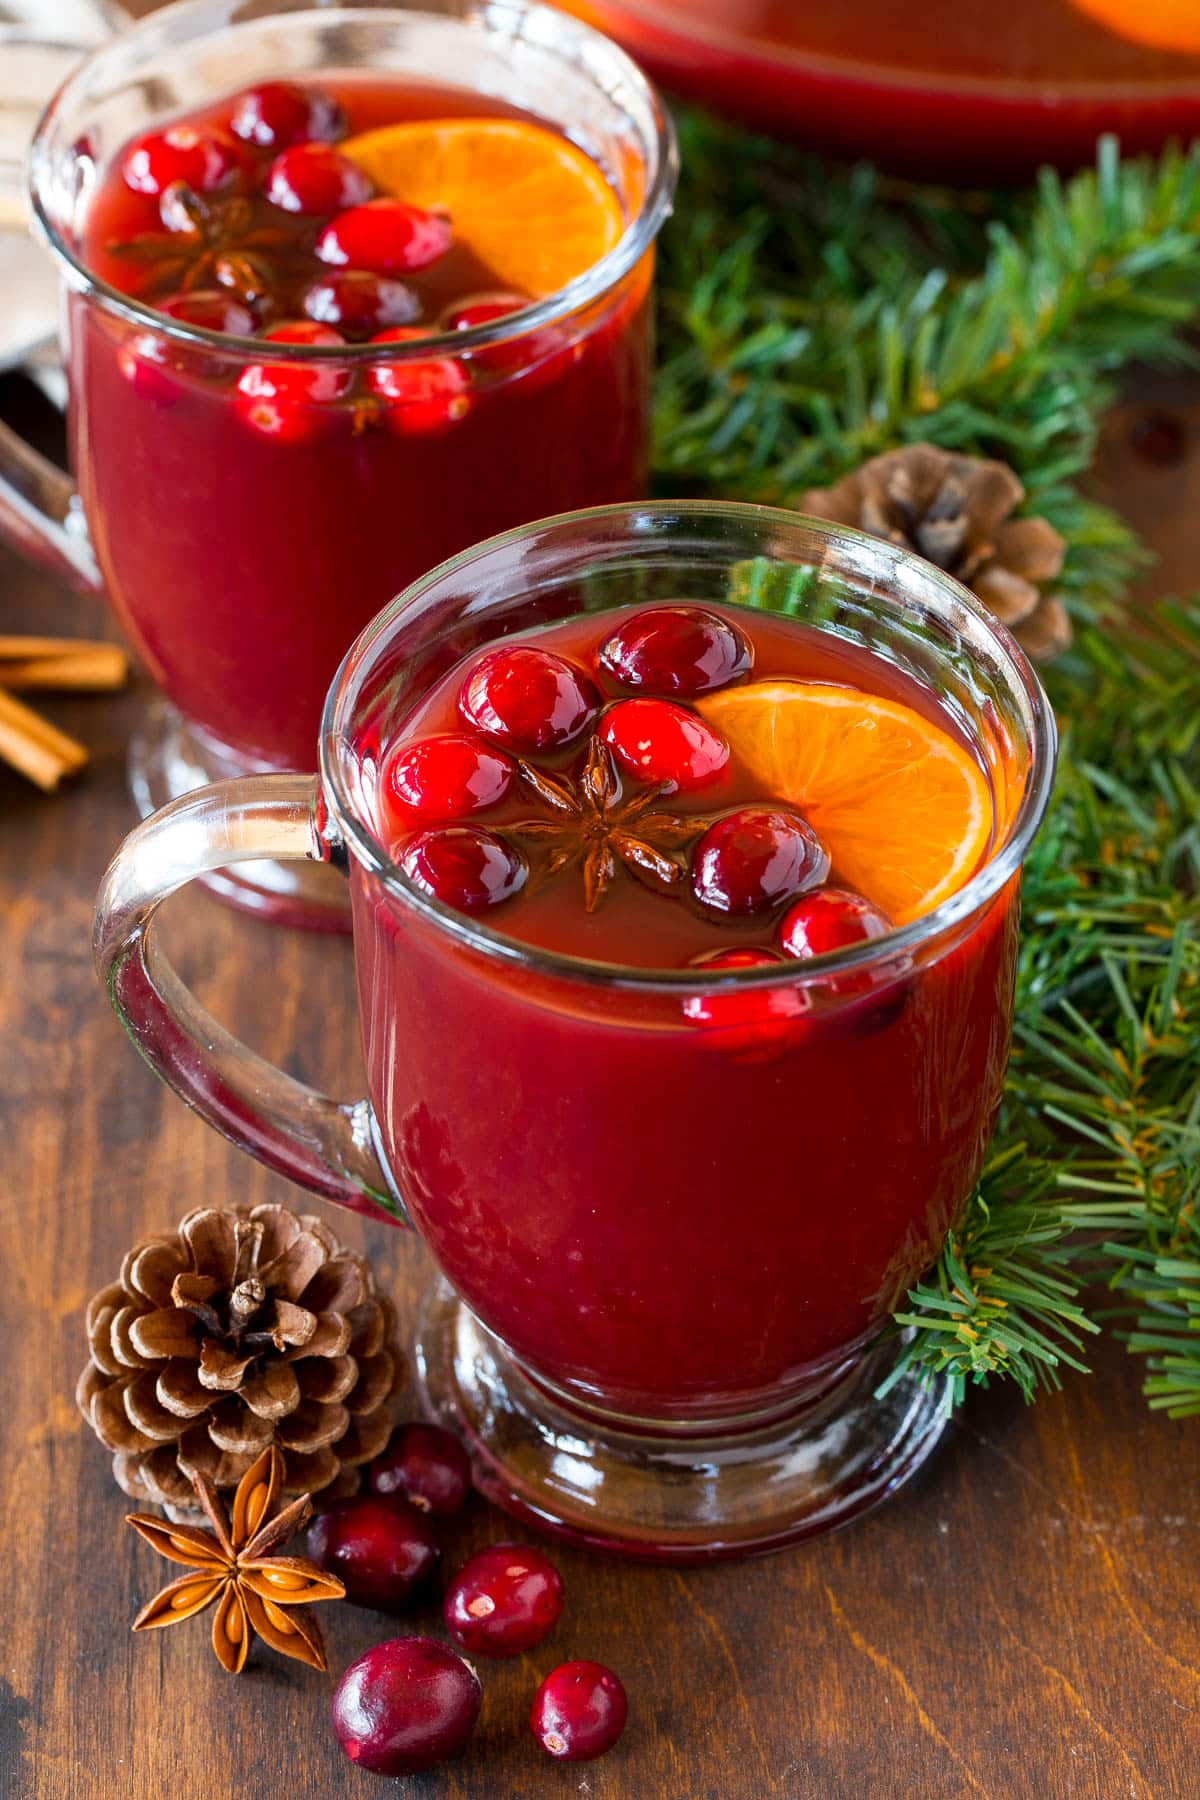 Mugs of Kinderpunsch topped with cranberries and orange slices.